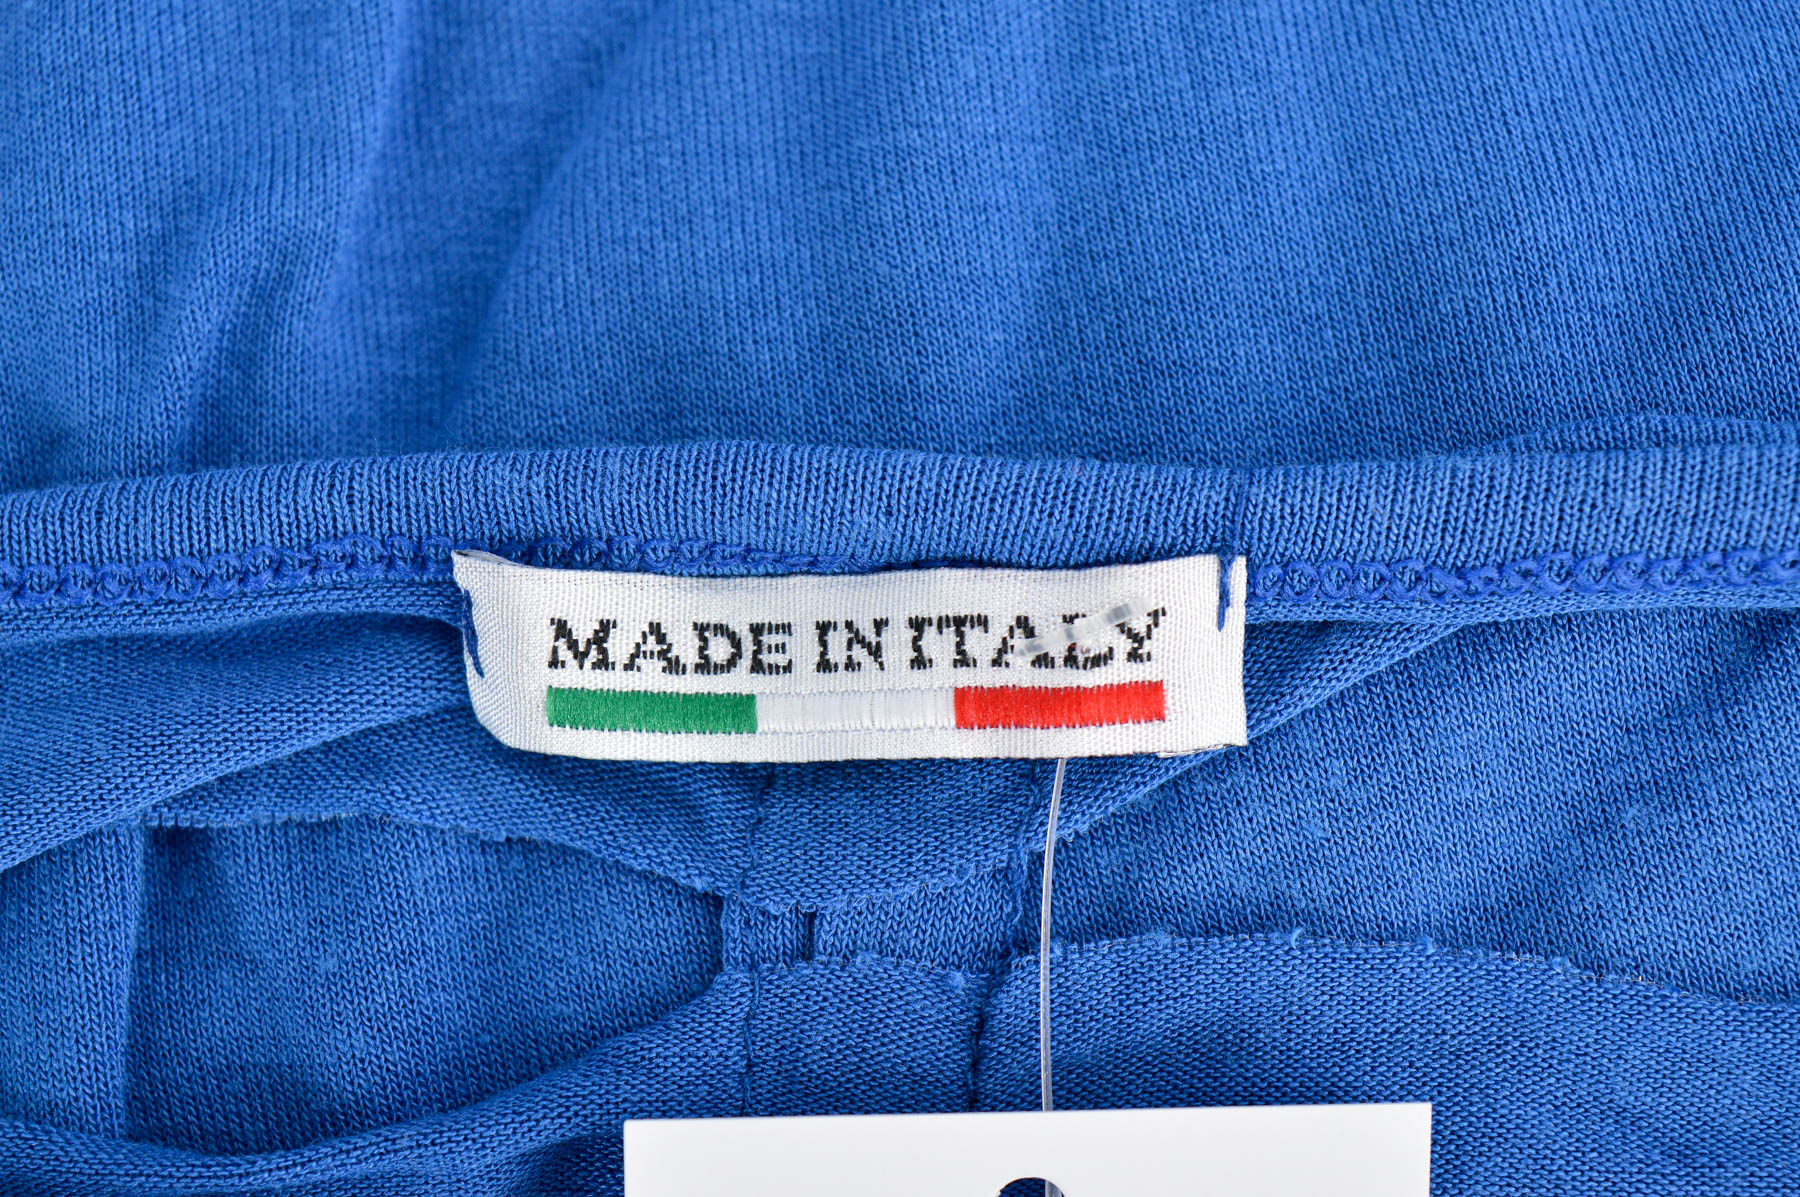 Women's t-shirt - Made in Italy - 2